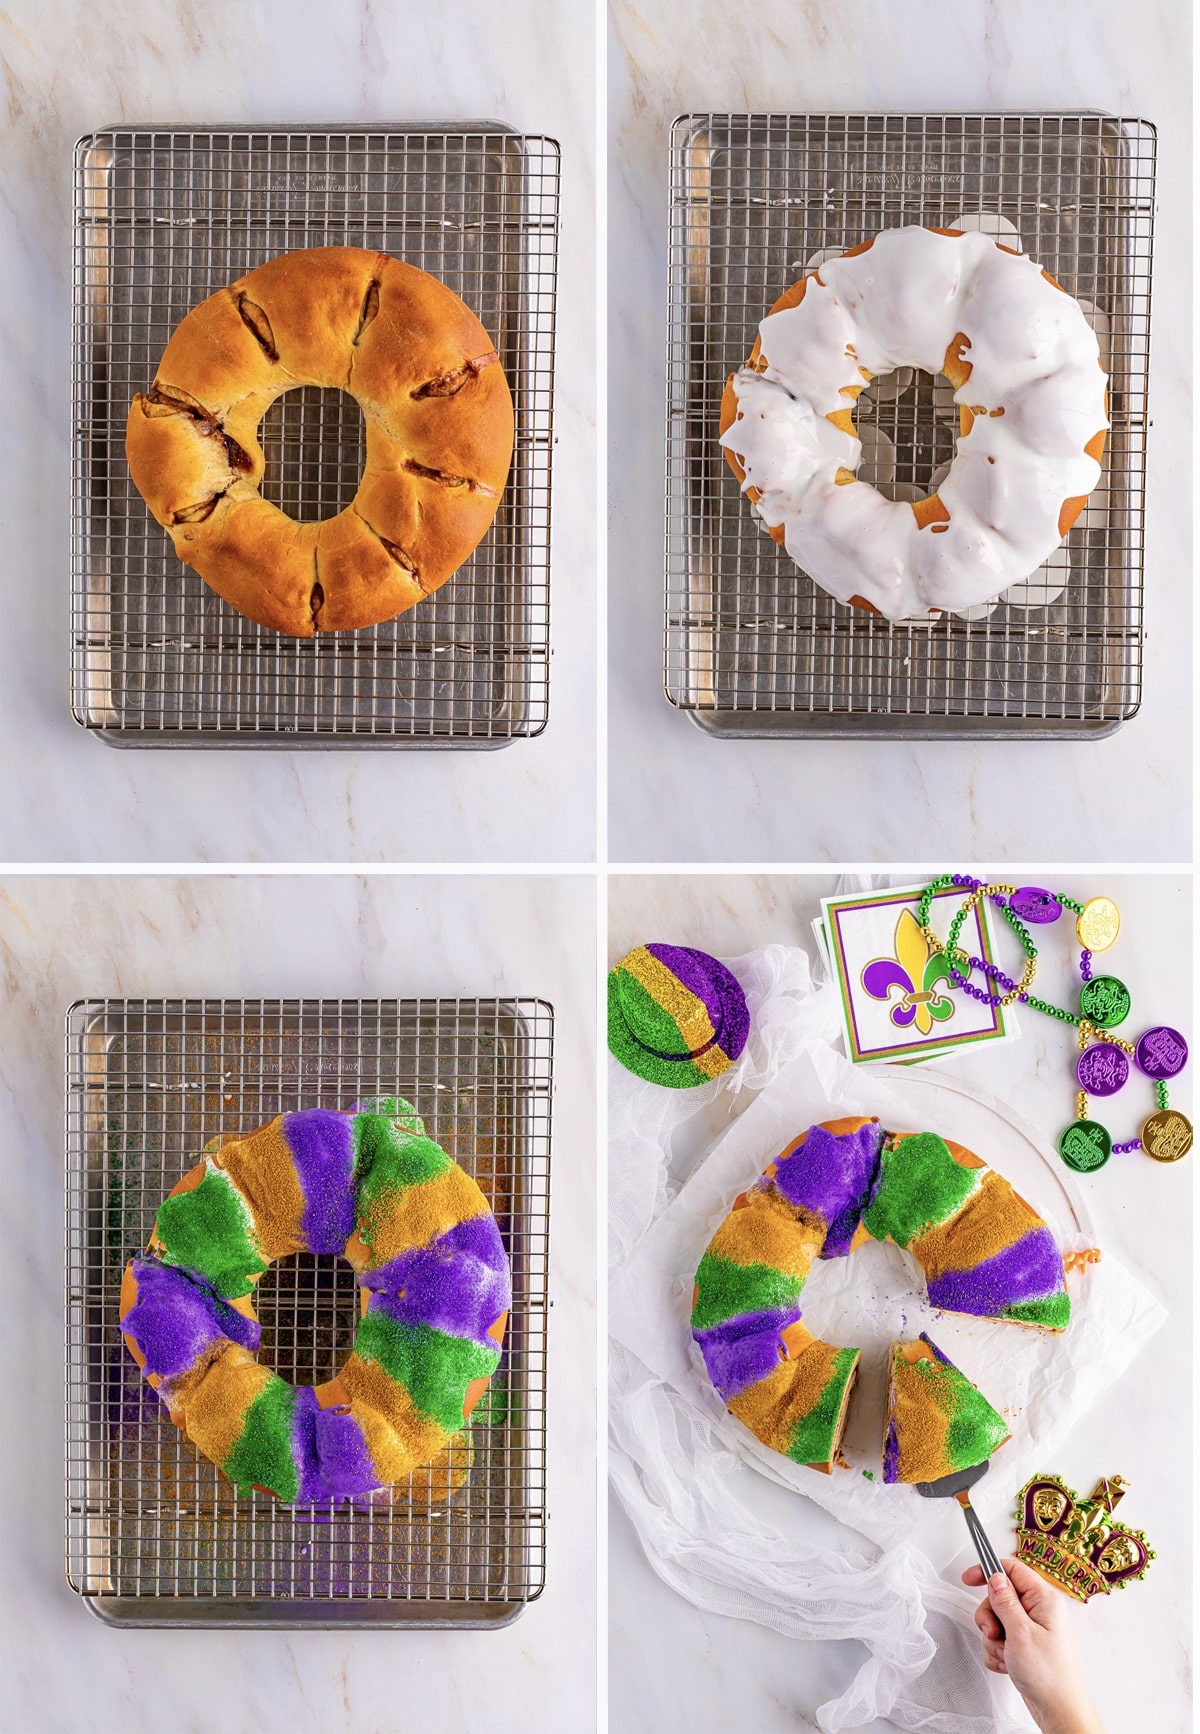 Collage of photos showing how to glaze and decorate this King Cake Recipe on a tan mable table top